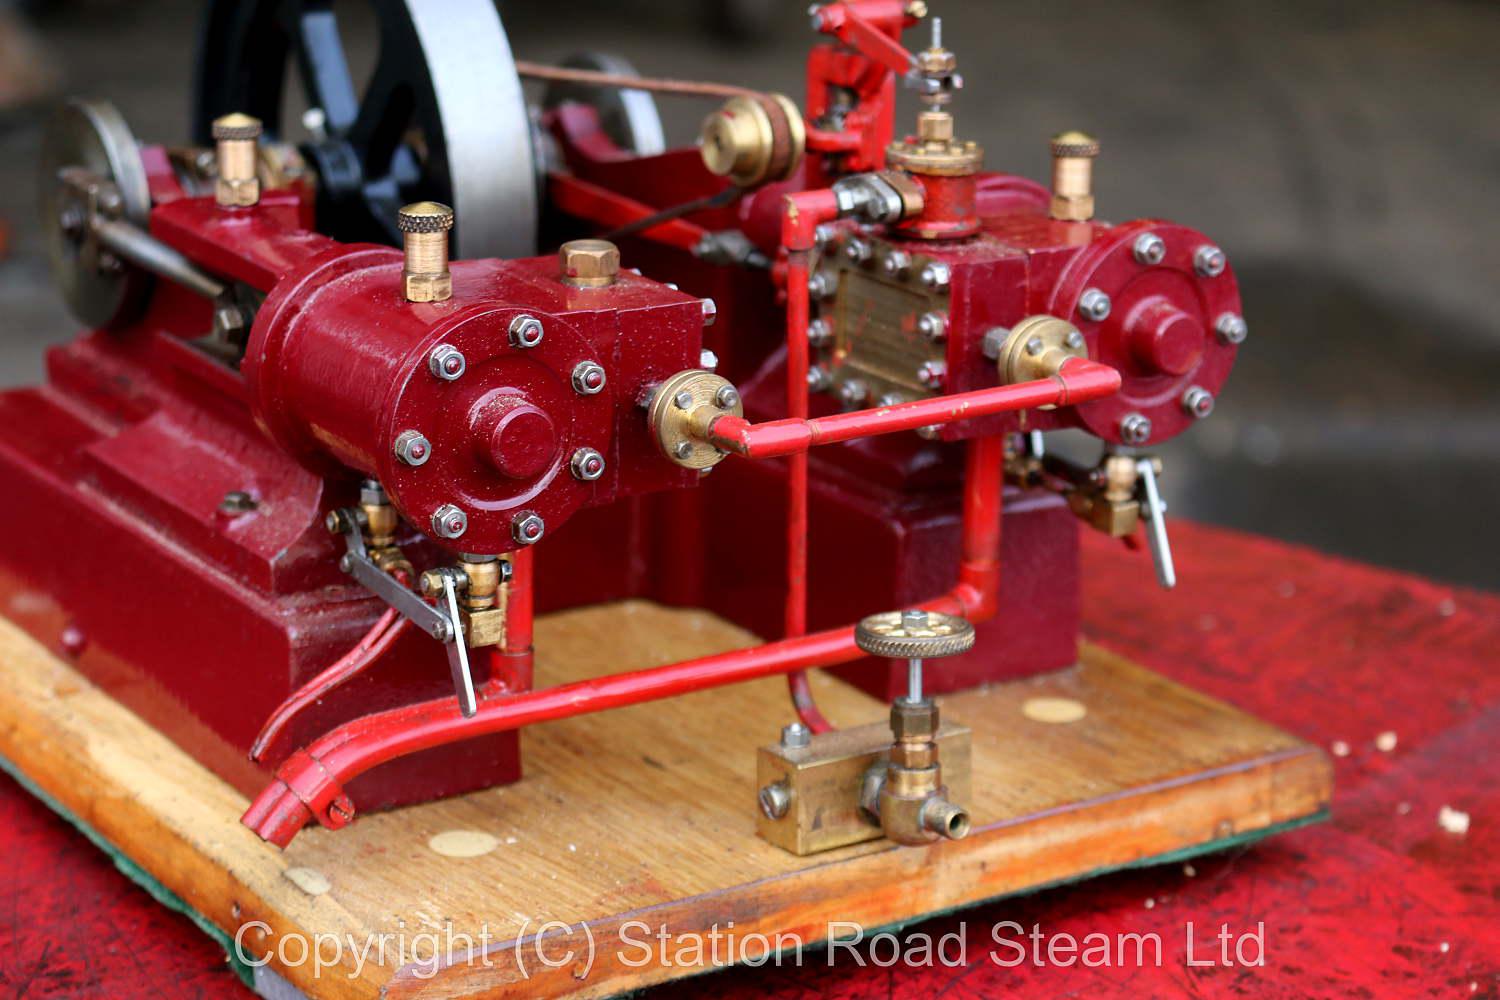 Double Tangye mill engine